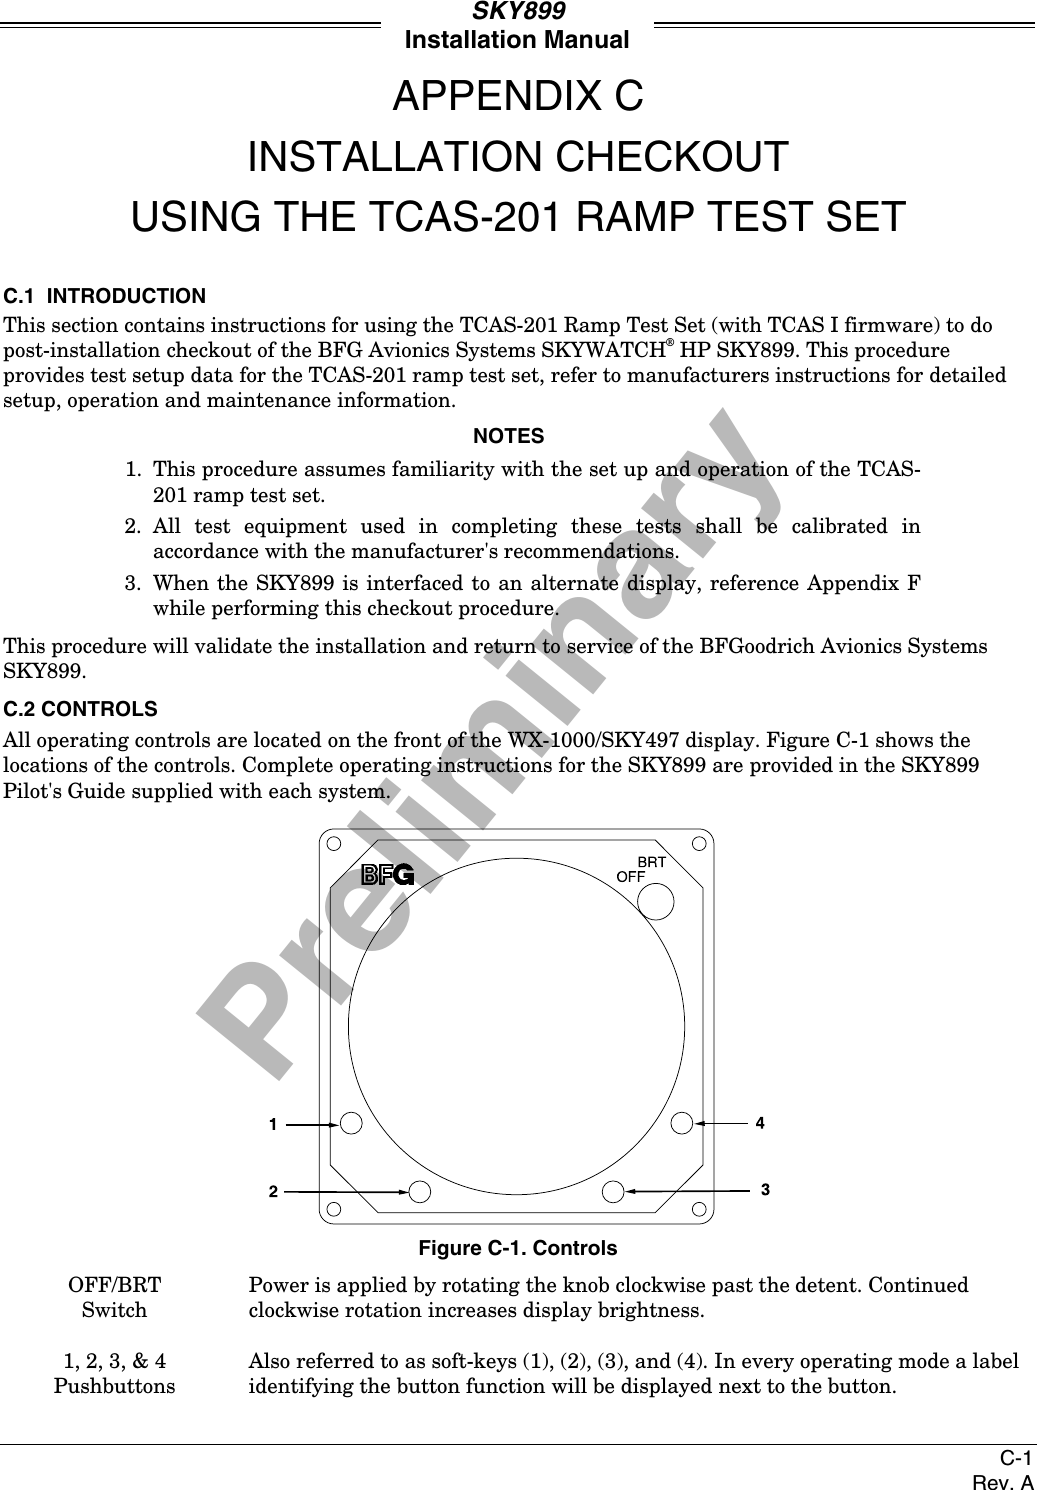 PreliminarySKY899Installation ManualC-1Rev. AAPPENDIX CINSTALLATION CHECKOUTUSING THE TCAS-201 RAMP TEST SETC.1  INTRODUCTIONThis section contains instructions for using the TCAS-201 Ramp Test Set (with TCAS I firmware) to dopost-installation checkout of the BFG Avionics Systems SKYWATCH® HP SKY899. This procedureprovides test setup data for the TCAS-201 ramp test set, refer to manufacturers instructions for detailedsetup, operation and maintenance information.NOTES1. This procedure assumes familiarity with the set up and operation of the TCAS-201 ramp test set.2. All test equipment used in completing these tests shall be calibrated inaccordance with the manufacturer&apos;s recommendations.3. When the SKY899 is interfaced to an alternate display, reference Appendix Fwhile performing this checkout procedure.This procedure will validate the installation and return to service of the BFGoodrich Avionics SystemsSKY899.C.2 CONTROLSAll operating controls are located on the front of the WX-1000/SKY497 display. Figure C-1 shows thelocations of the controls. Complete operating instructions for the SKY899 are provided in the SKY899Pilot&apos;s Guide supplied with each system.Figure C-1. ControlsOFF/BRTSwitchPower is applied by rotating the knob clockwise past the detent. Continuedclockwise rotation increases display brightness.1, 2, 3, &amp; 4PushbuttonsAlso referred to as soft-keys (1), (2), (3), and (4). In every operating mode a labelidentifying the button function will be displayed next to the button.